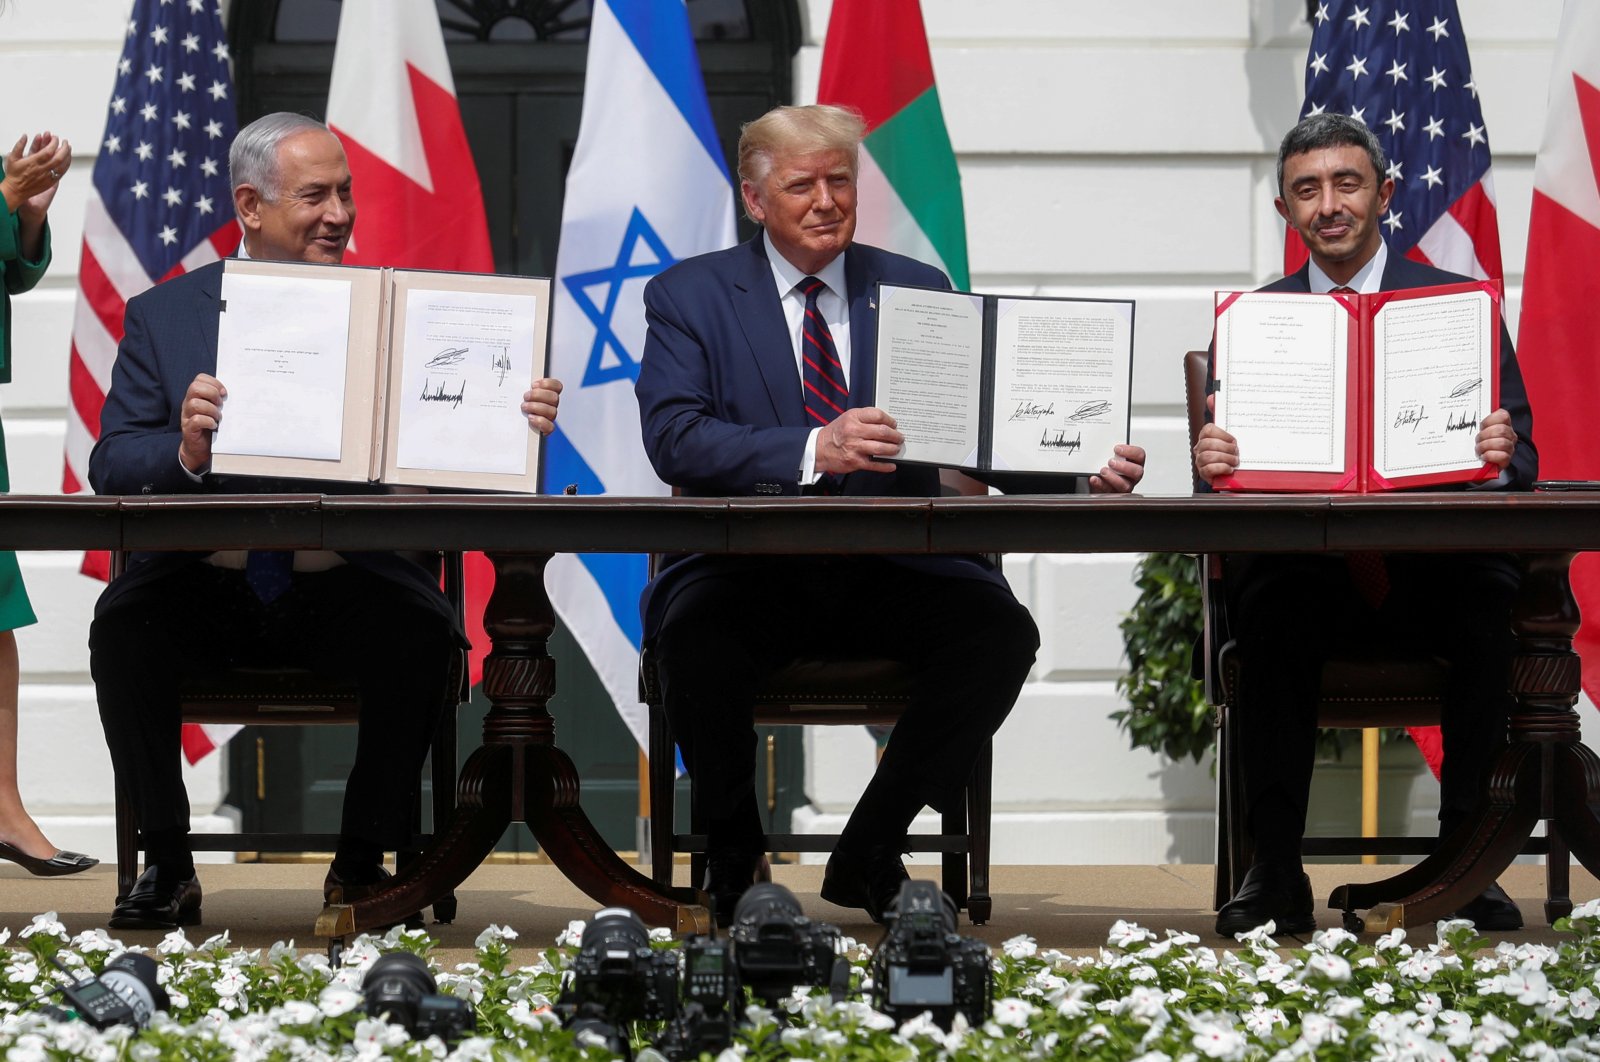 Israel's Prime Minister Benjamin Netanyahu, U.S. President Donald Trump and United Arab Emirates (UAE) Foreign Minister Abdullah bin Zayed display their copies of signed agreements as they participate in the signing ceremony of the Abraham Accords in Washington D.C., Sept. 15, 2020. (Reuters Photo)